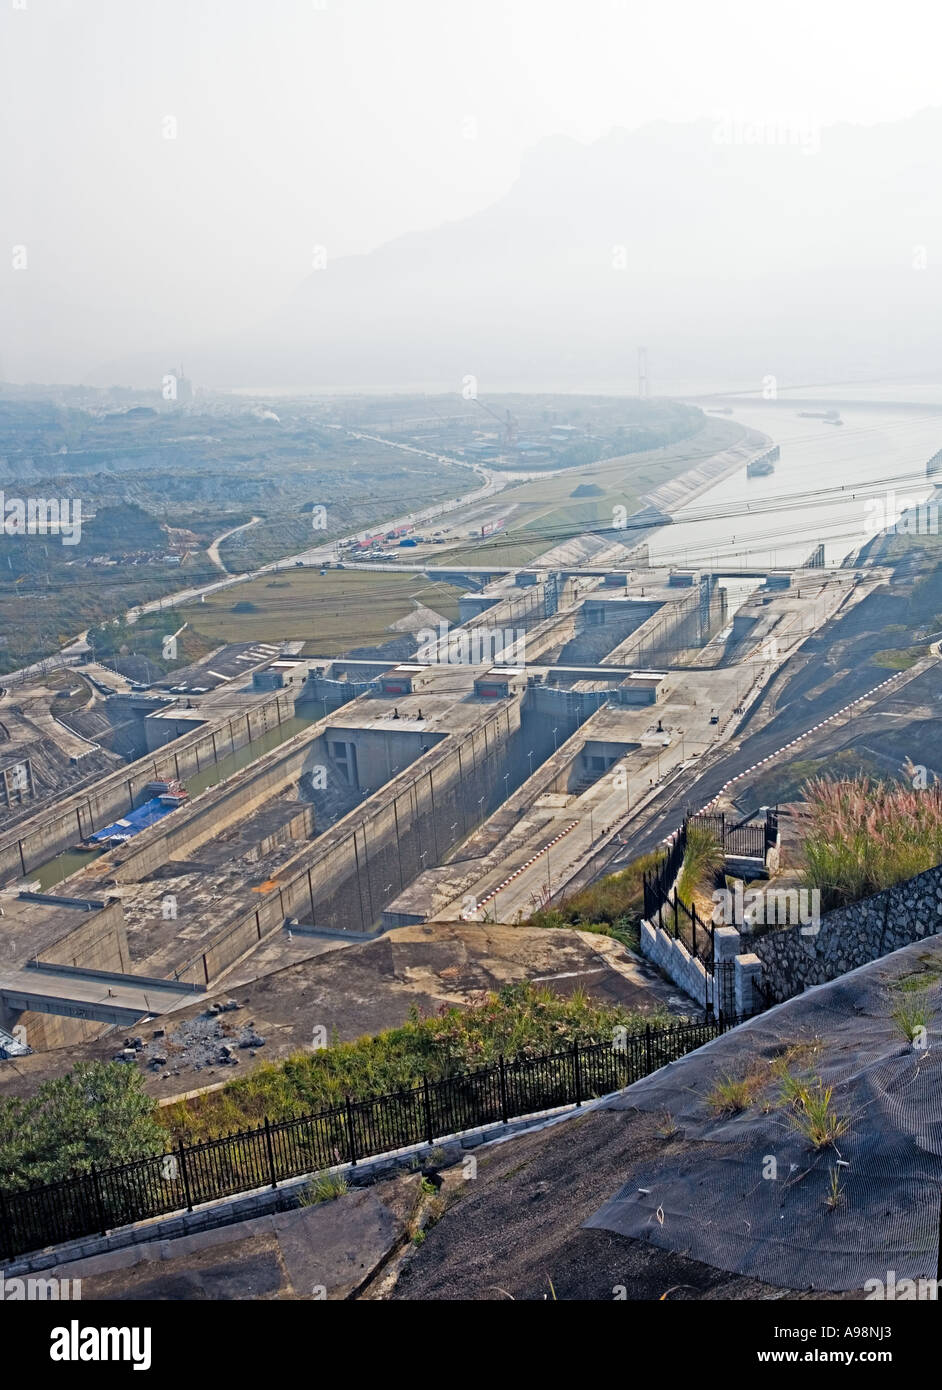 CHINA YANGTZE RIVER SANDOUPING Aerial view of the locks at the Three Gorges Dam site Stock Photo